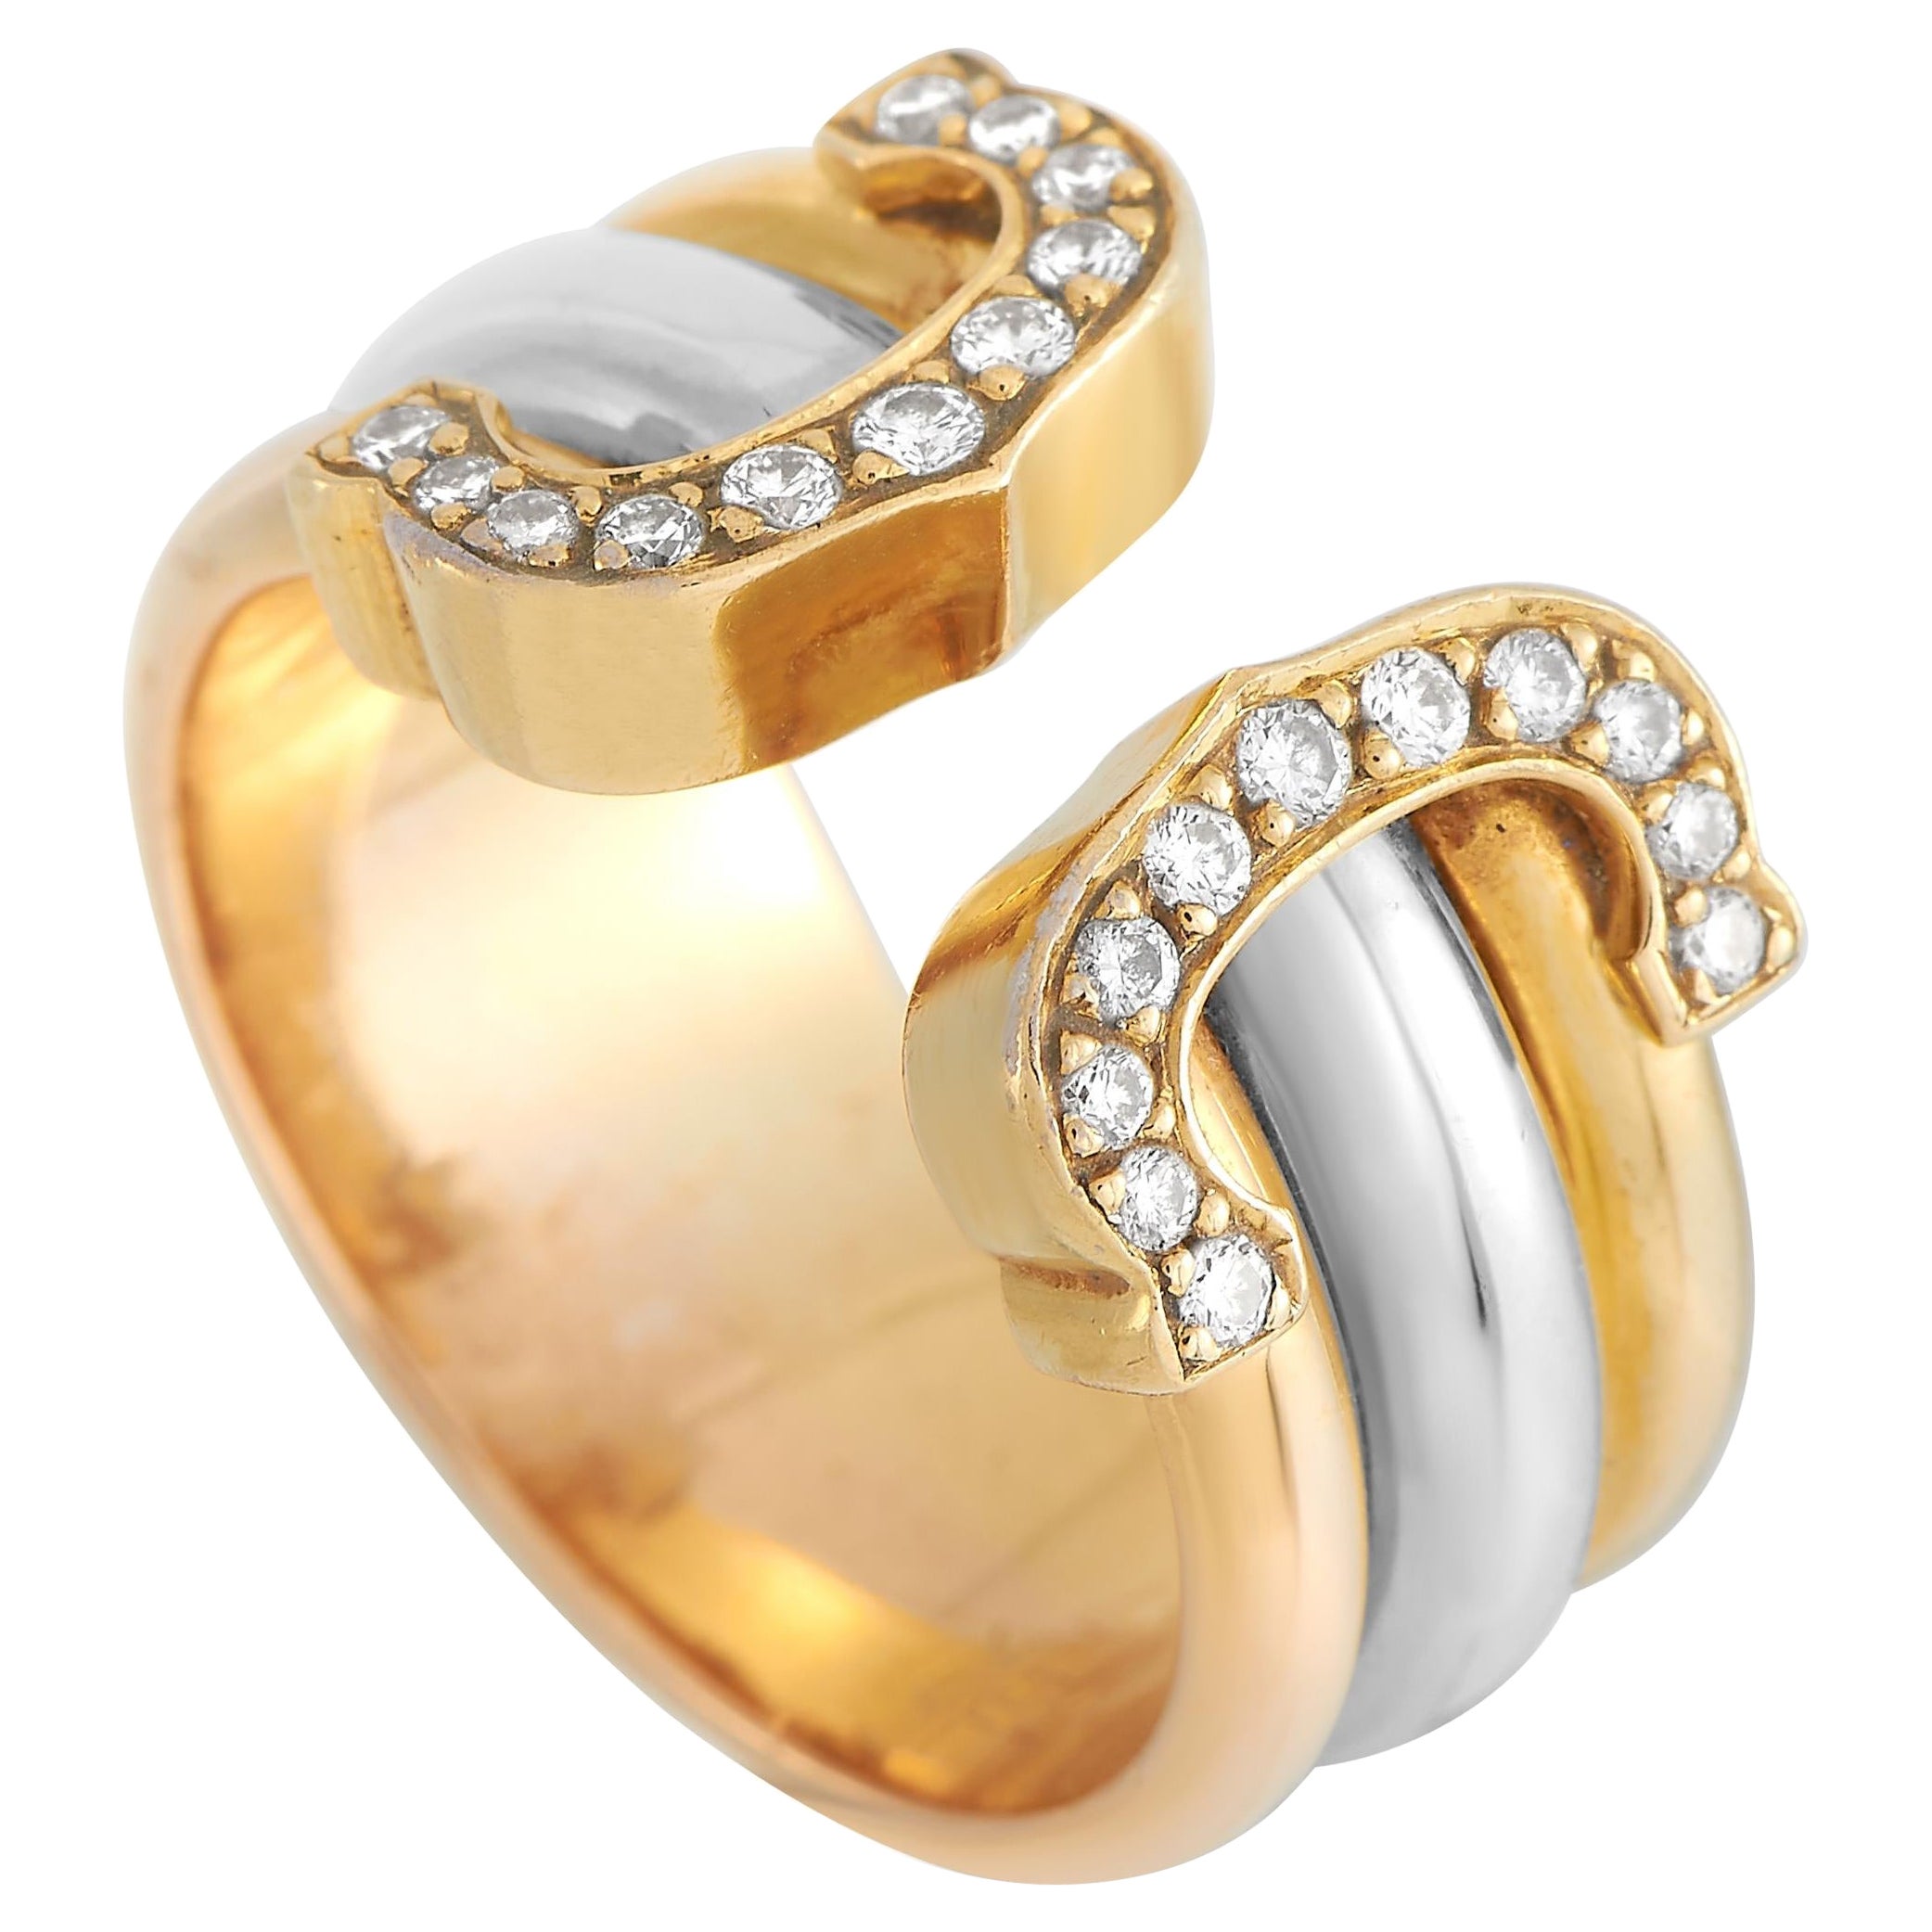 Cartier Double C 18K Yellow, White, and Rose Gold 0.20 Ct Diamond Ring